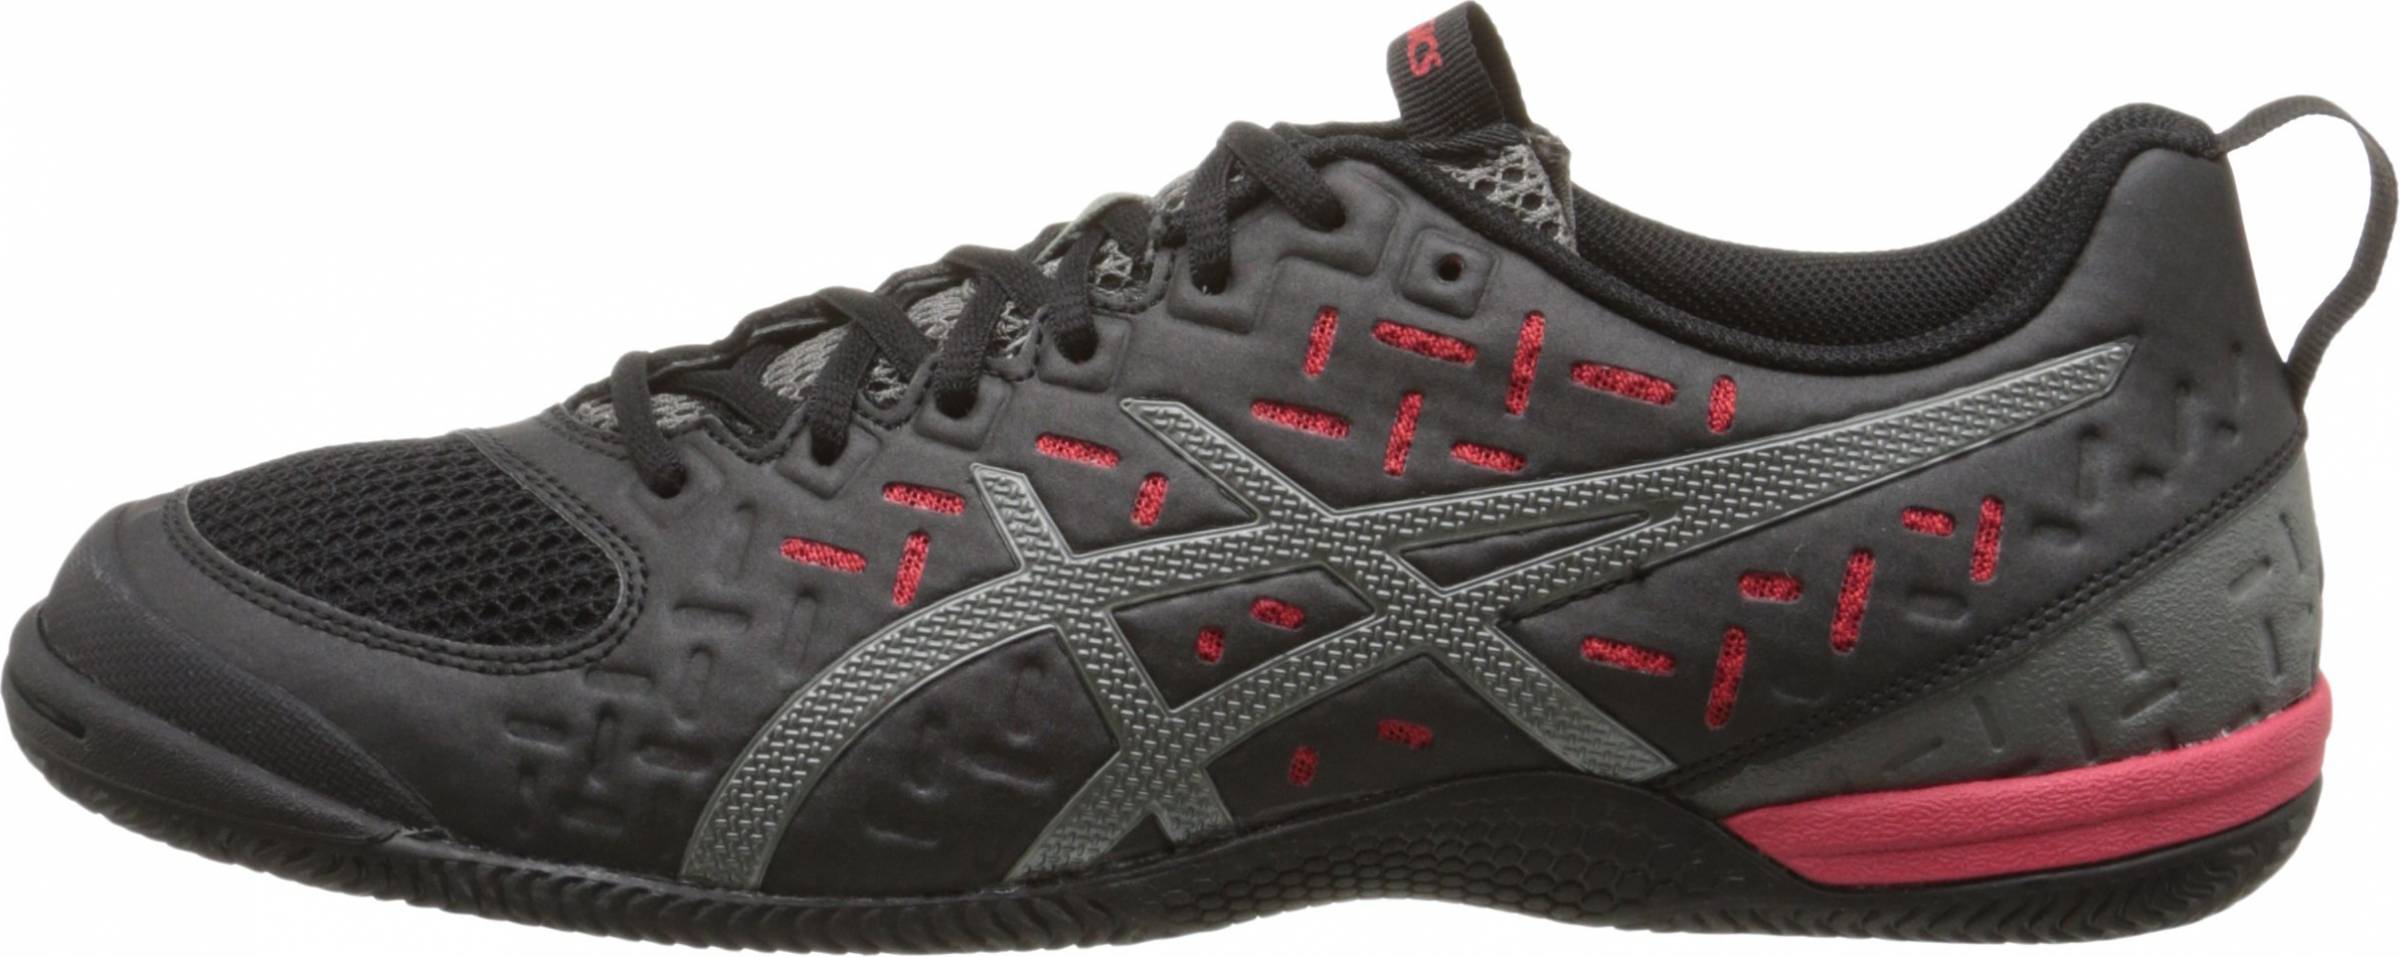 Save 36% on Asics Workout Shoes (10 